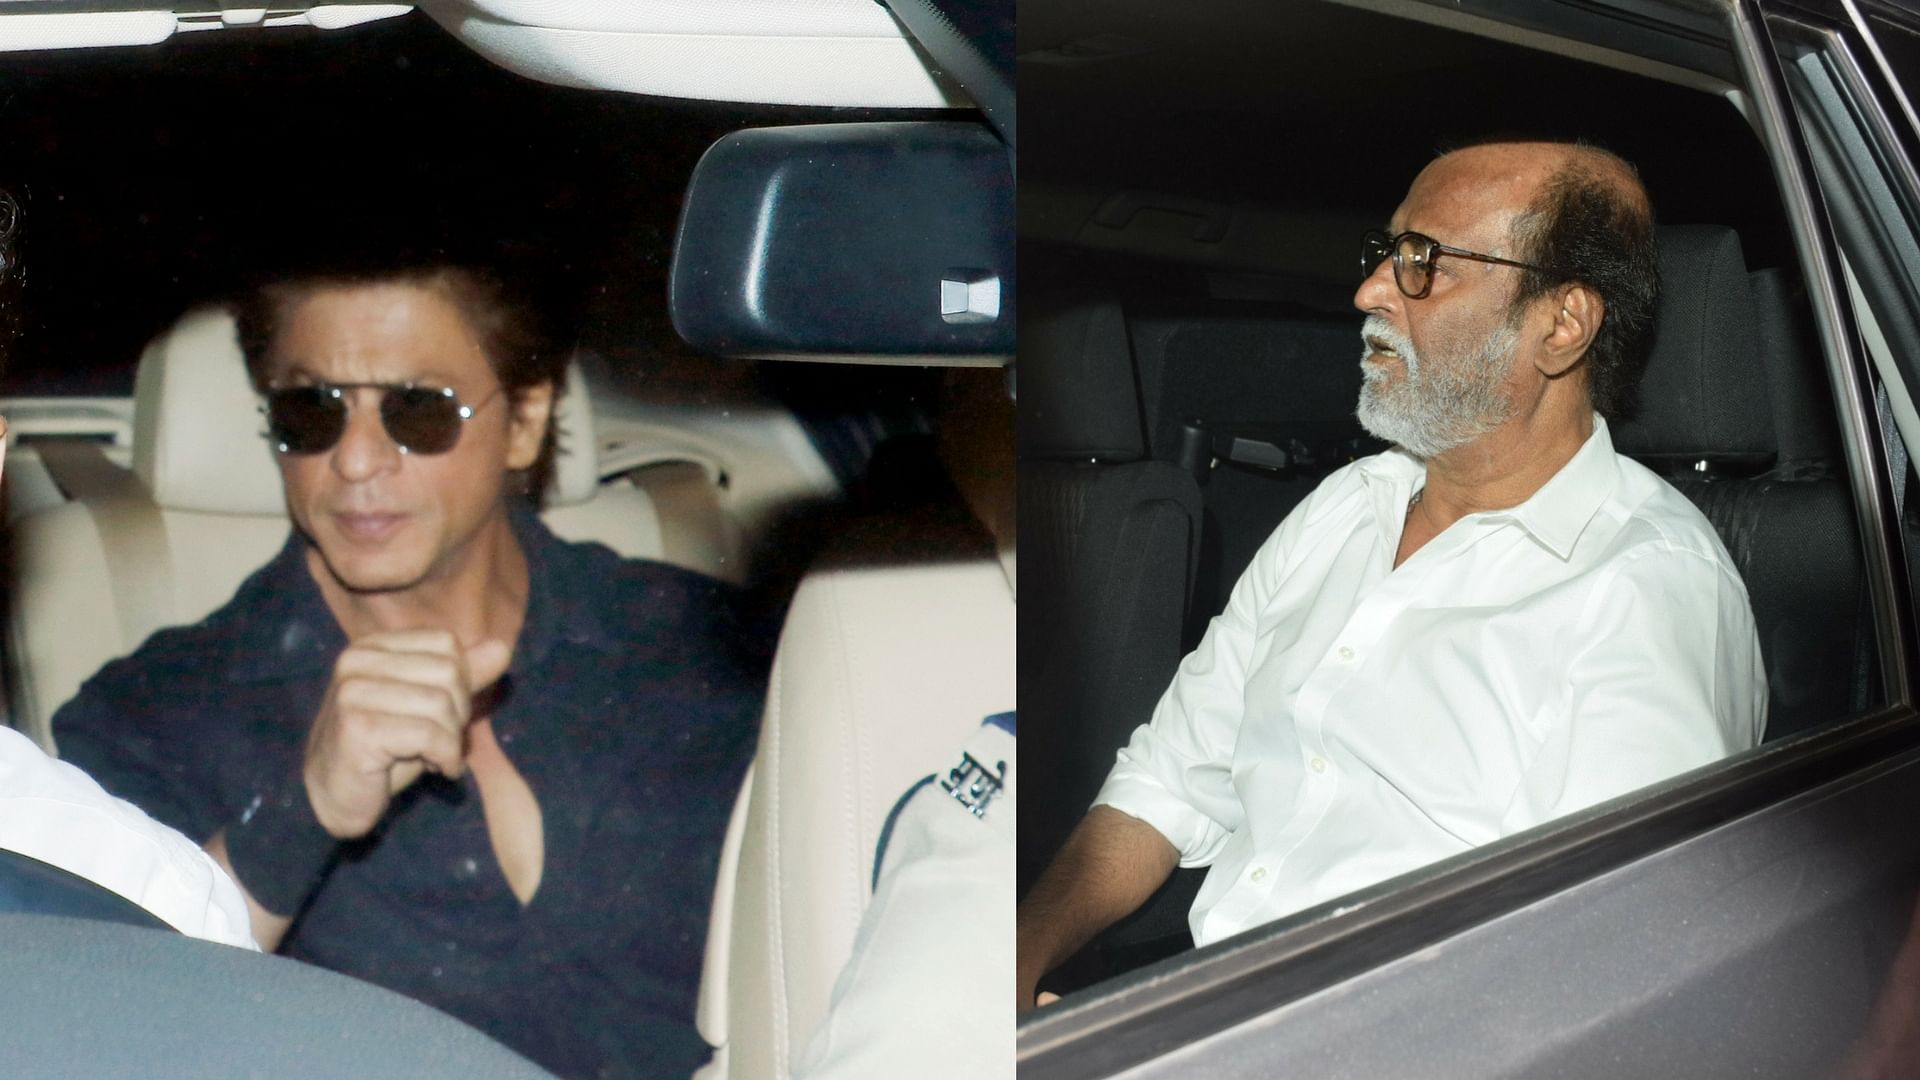 Shah Rukh Khan and Rajinikanth visited Anil Kapoor’s residence on Monday to pay their respects to Sridevi.